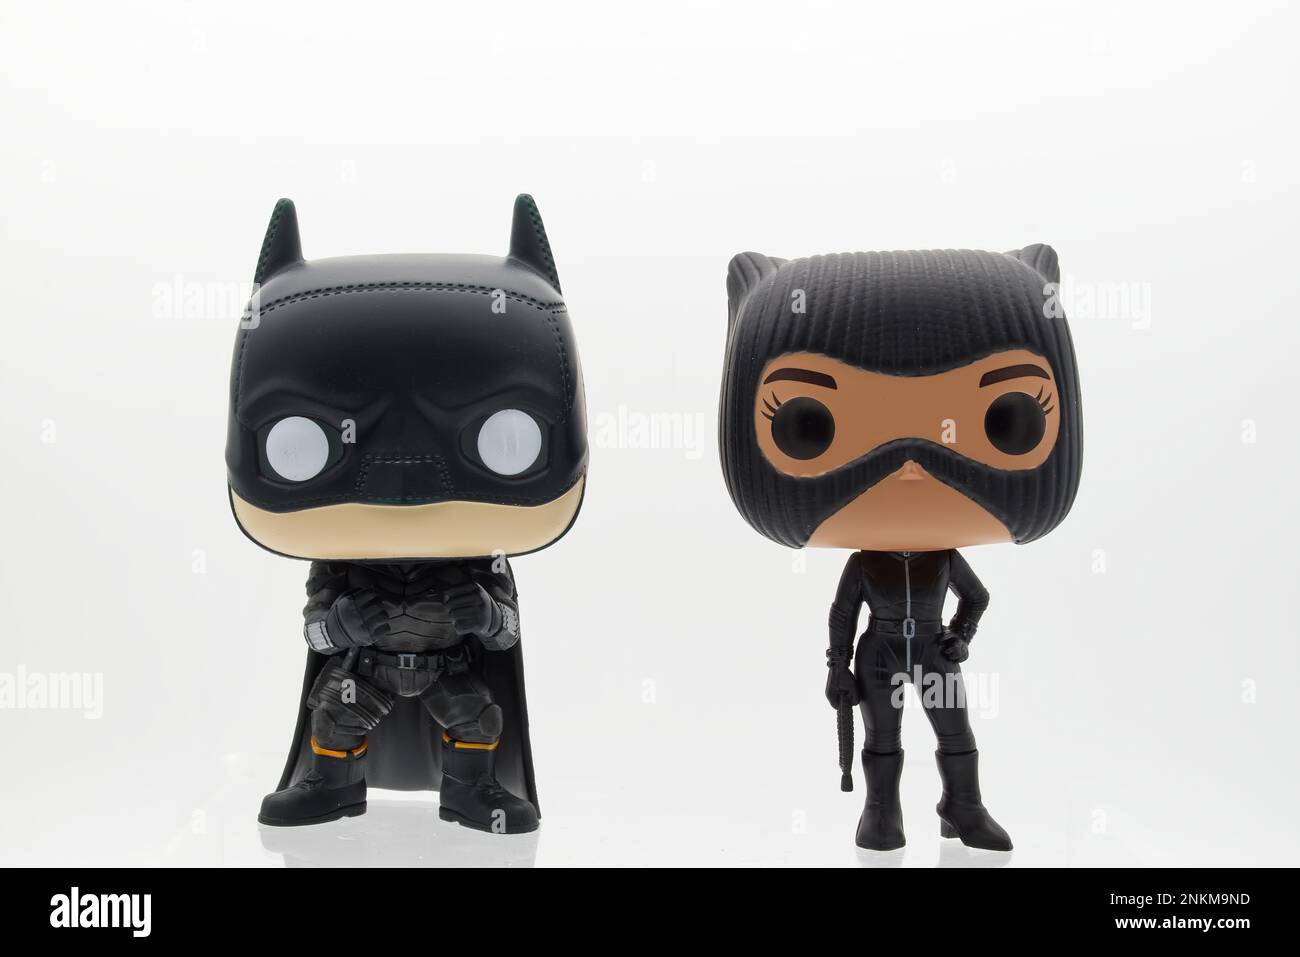 Batman and Catwoman action figure on white background. Batman from DC comics. Stock Photo